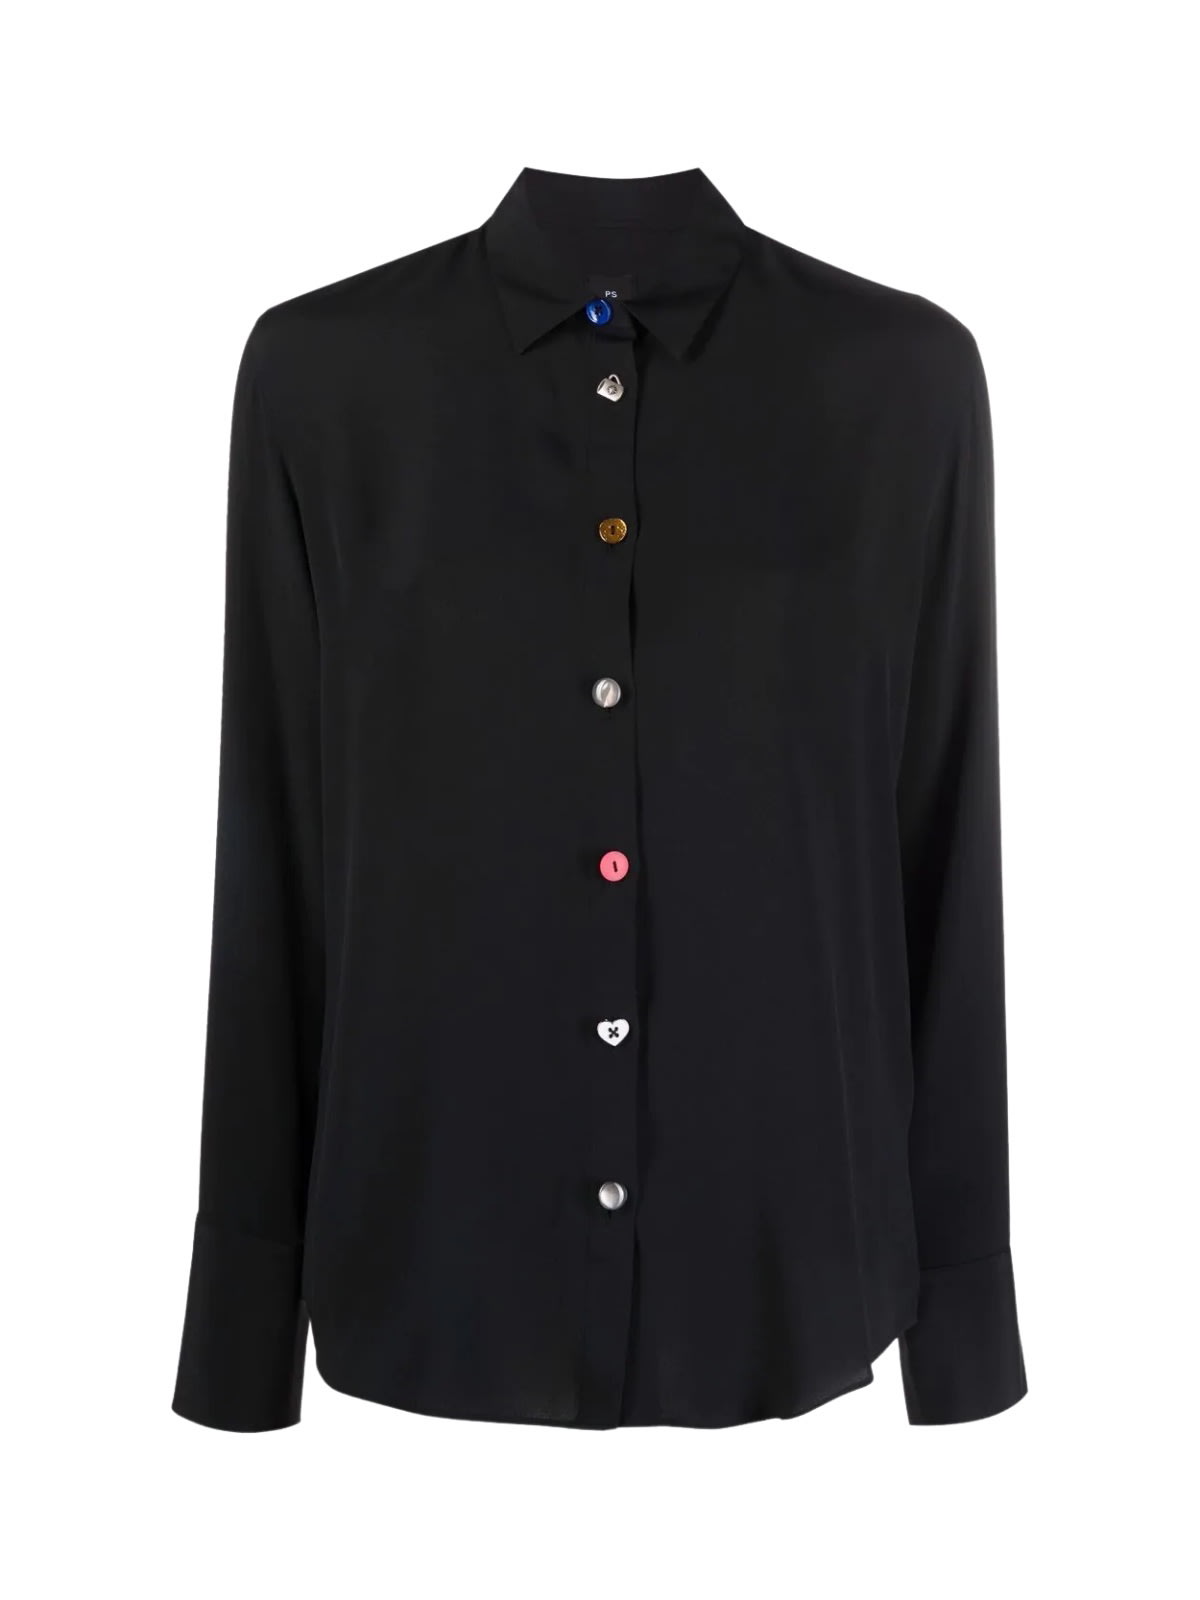 PS by Paul Smith Silk L/s Shirt